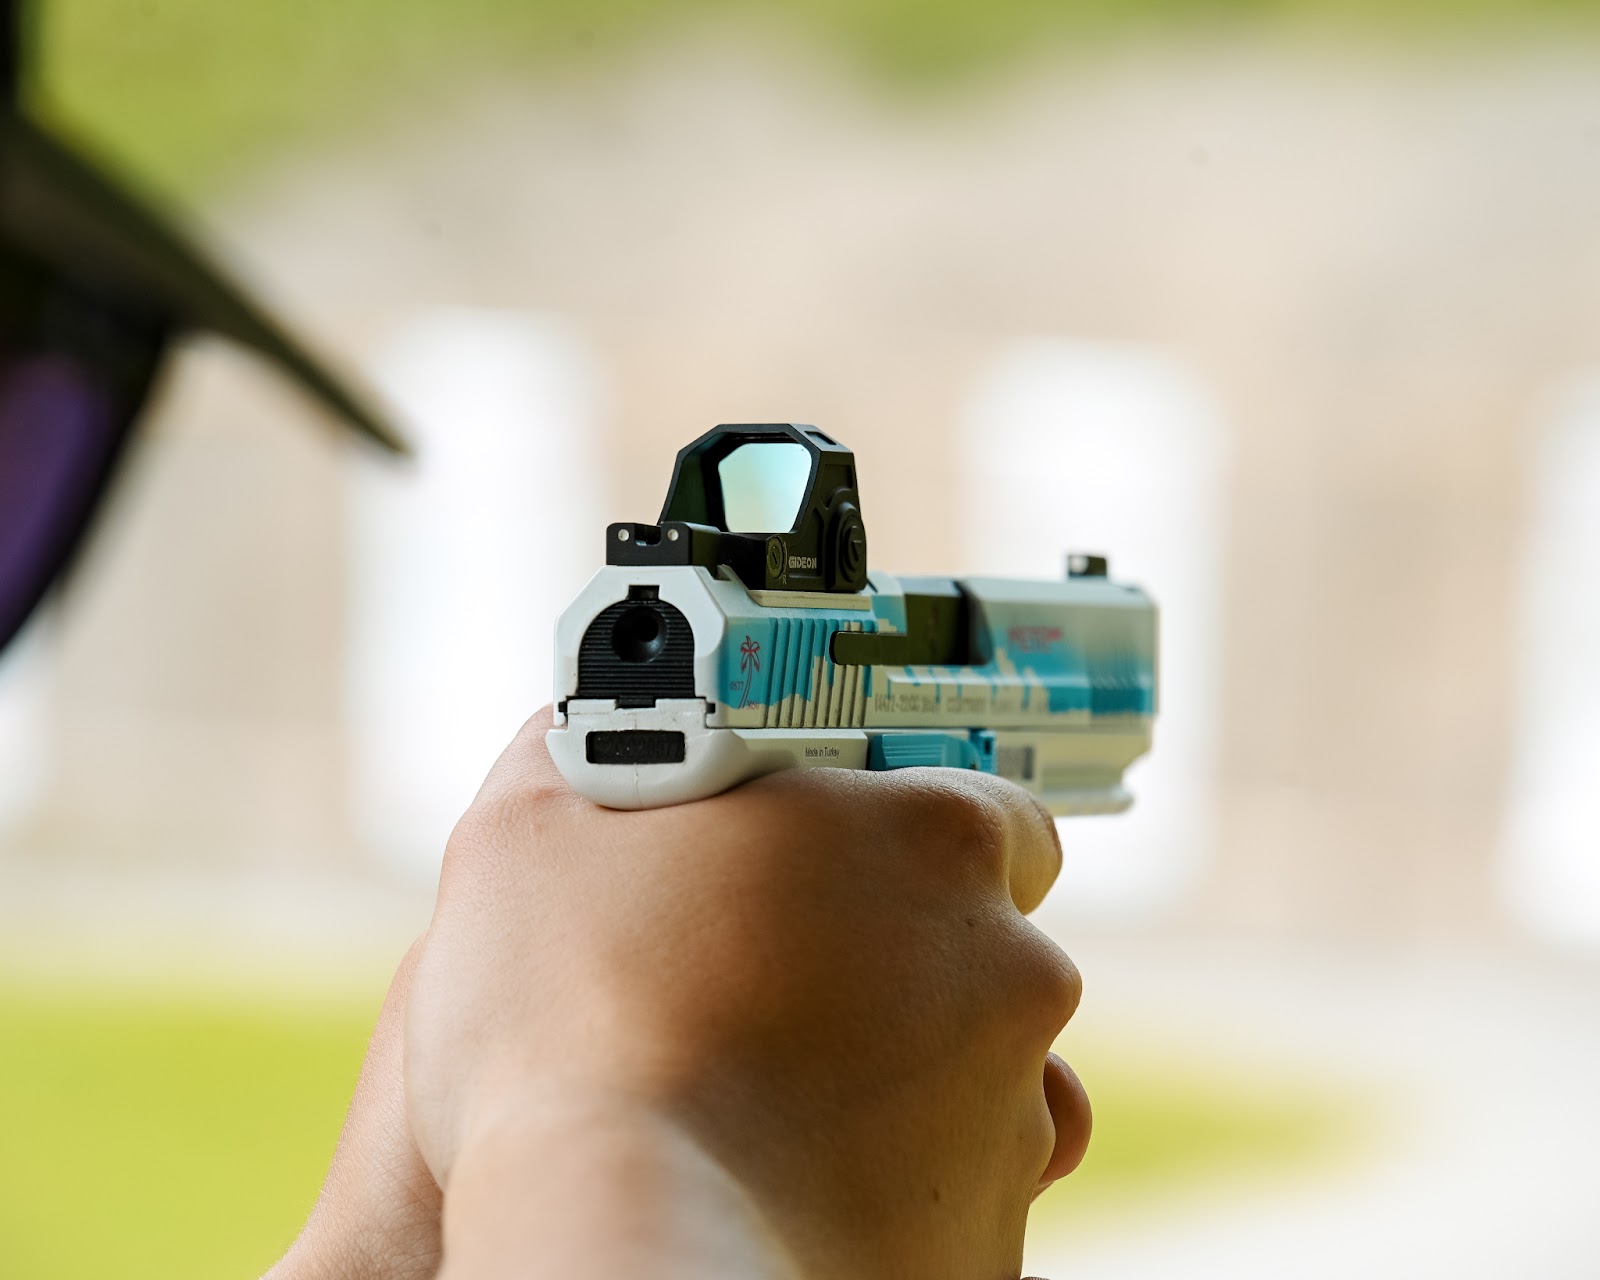 A shooter practices using a red dot sight